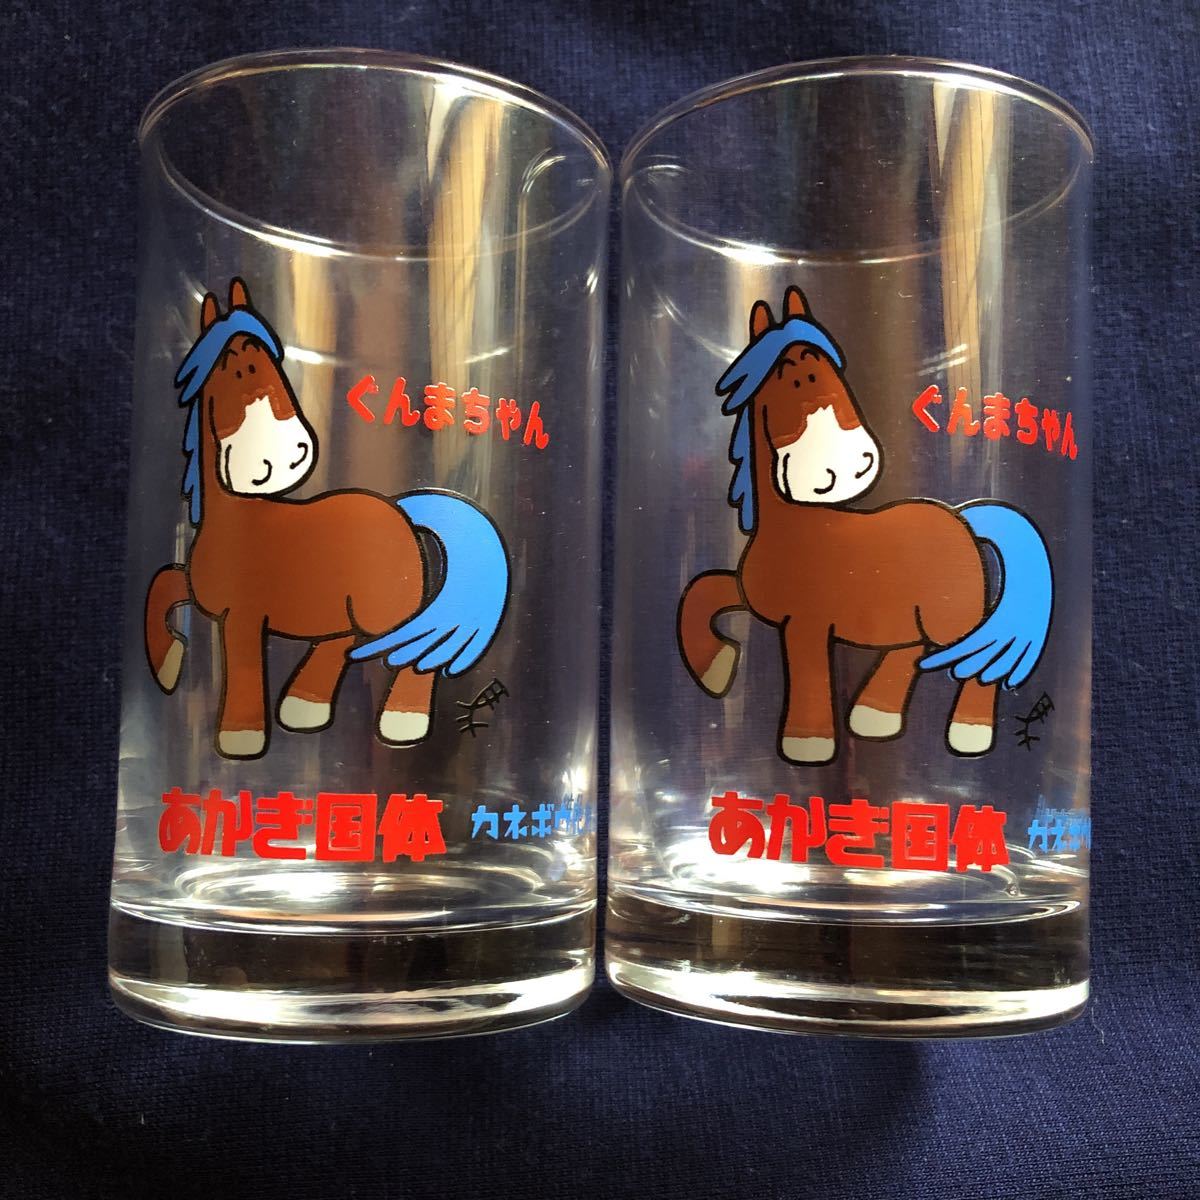 * Showa Retro * ultra rare rare goods 1983 year . hook country body first generation ... Chan glass tumbler 2 piece set Kanebo cosmetics Novelty that time thing 